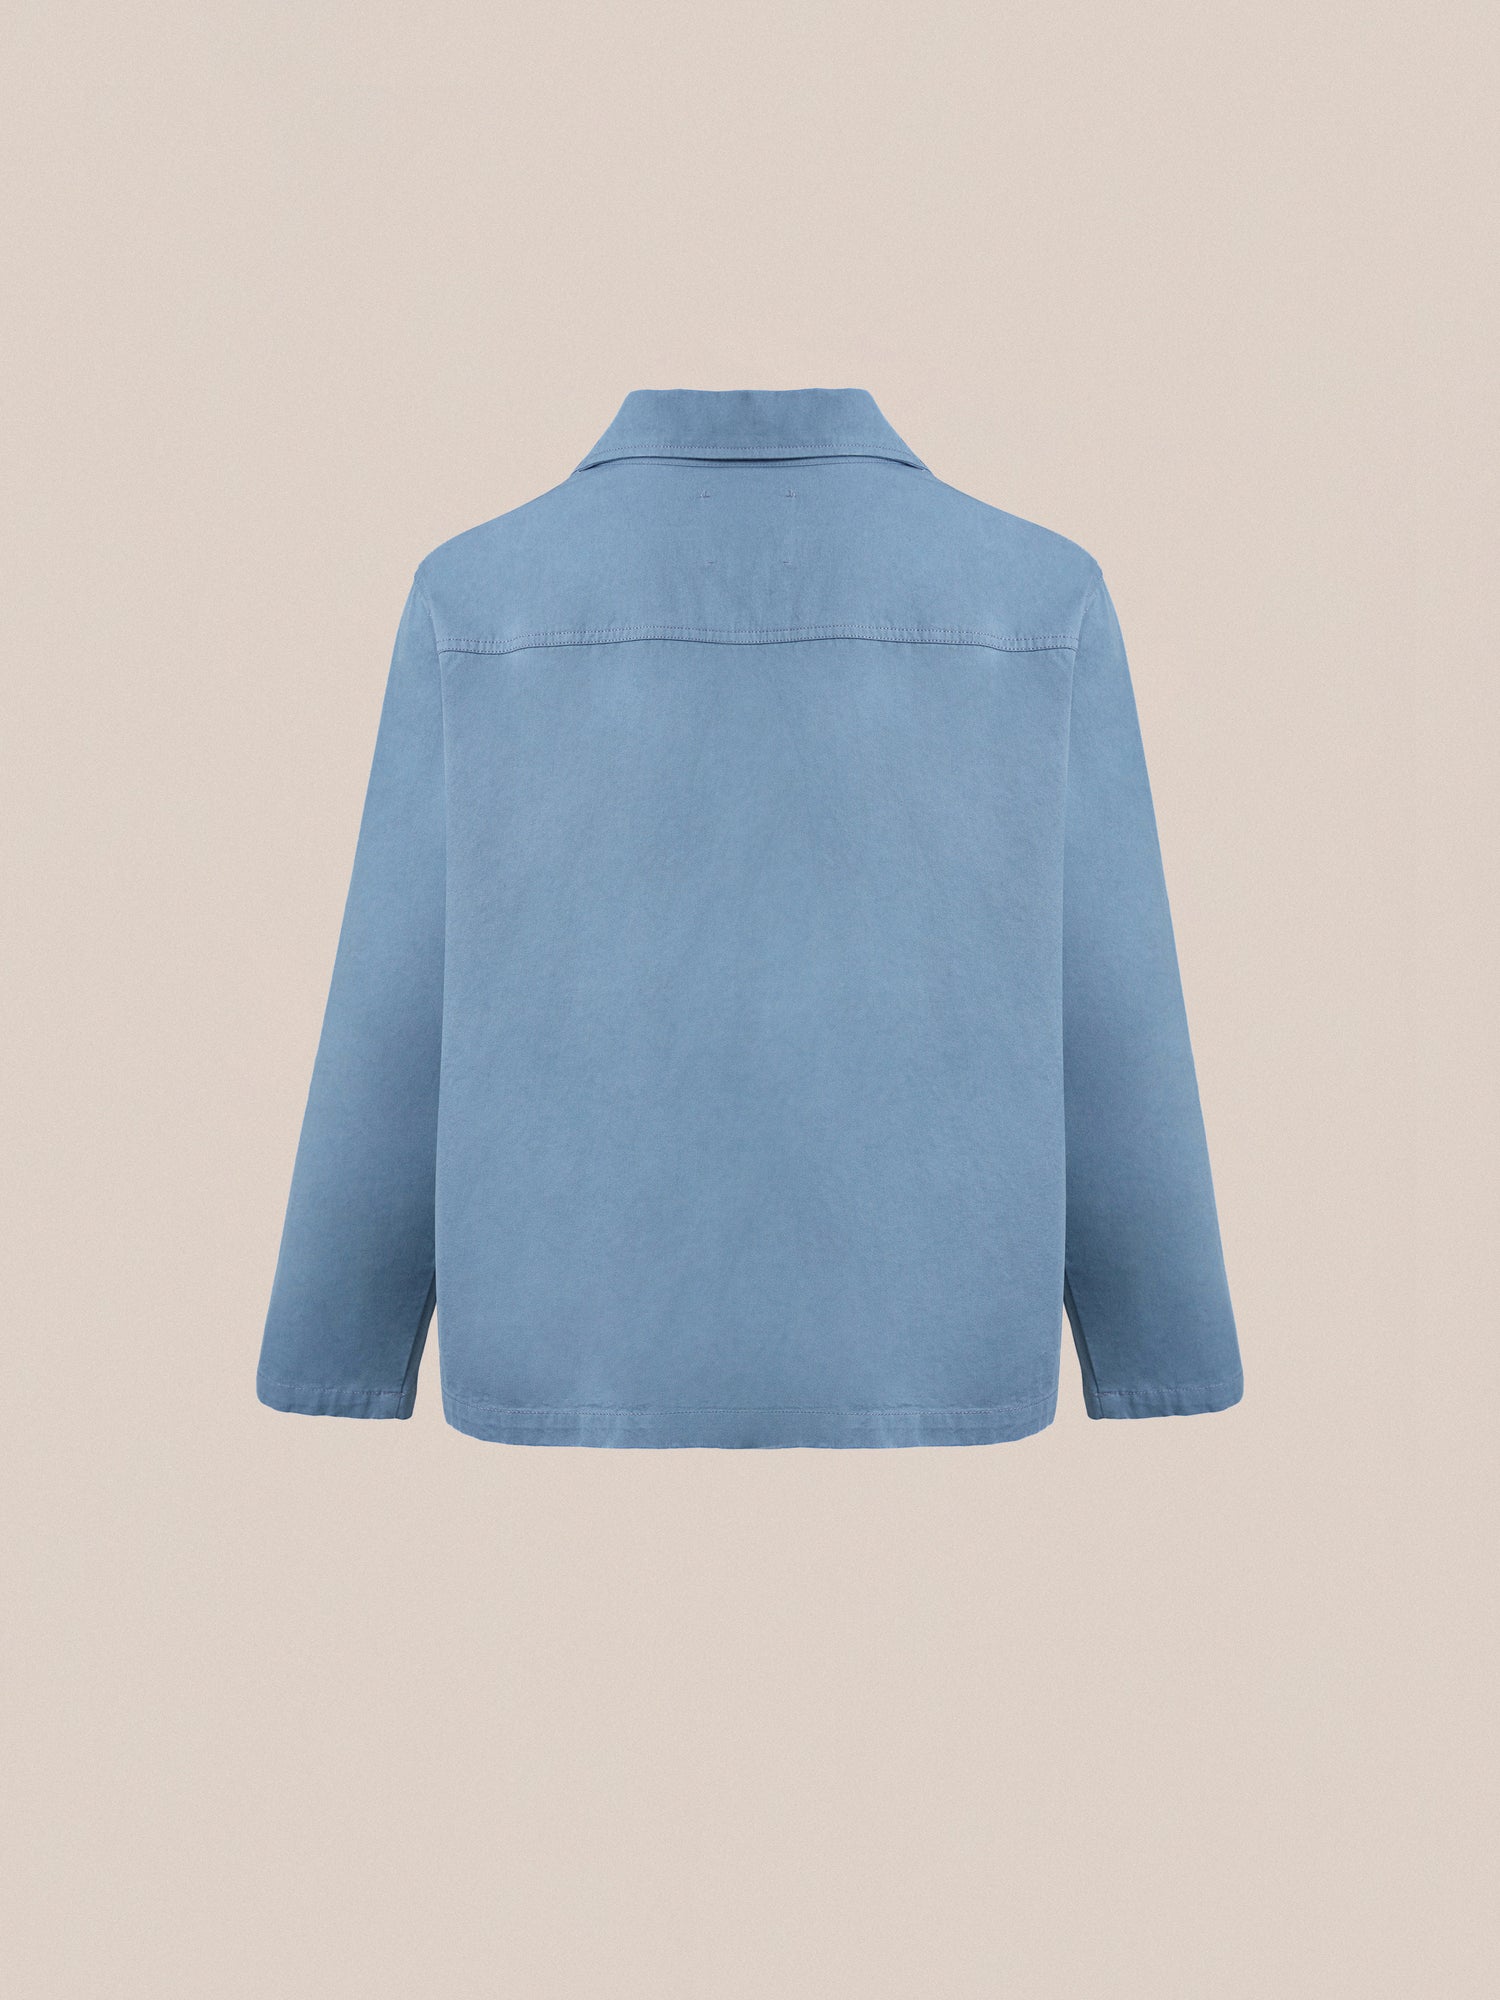 The back view of a vintage workwear-inspired durable blue denim Found Patina Work Jacket.